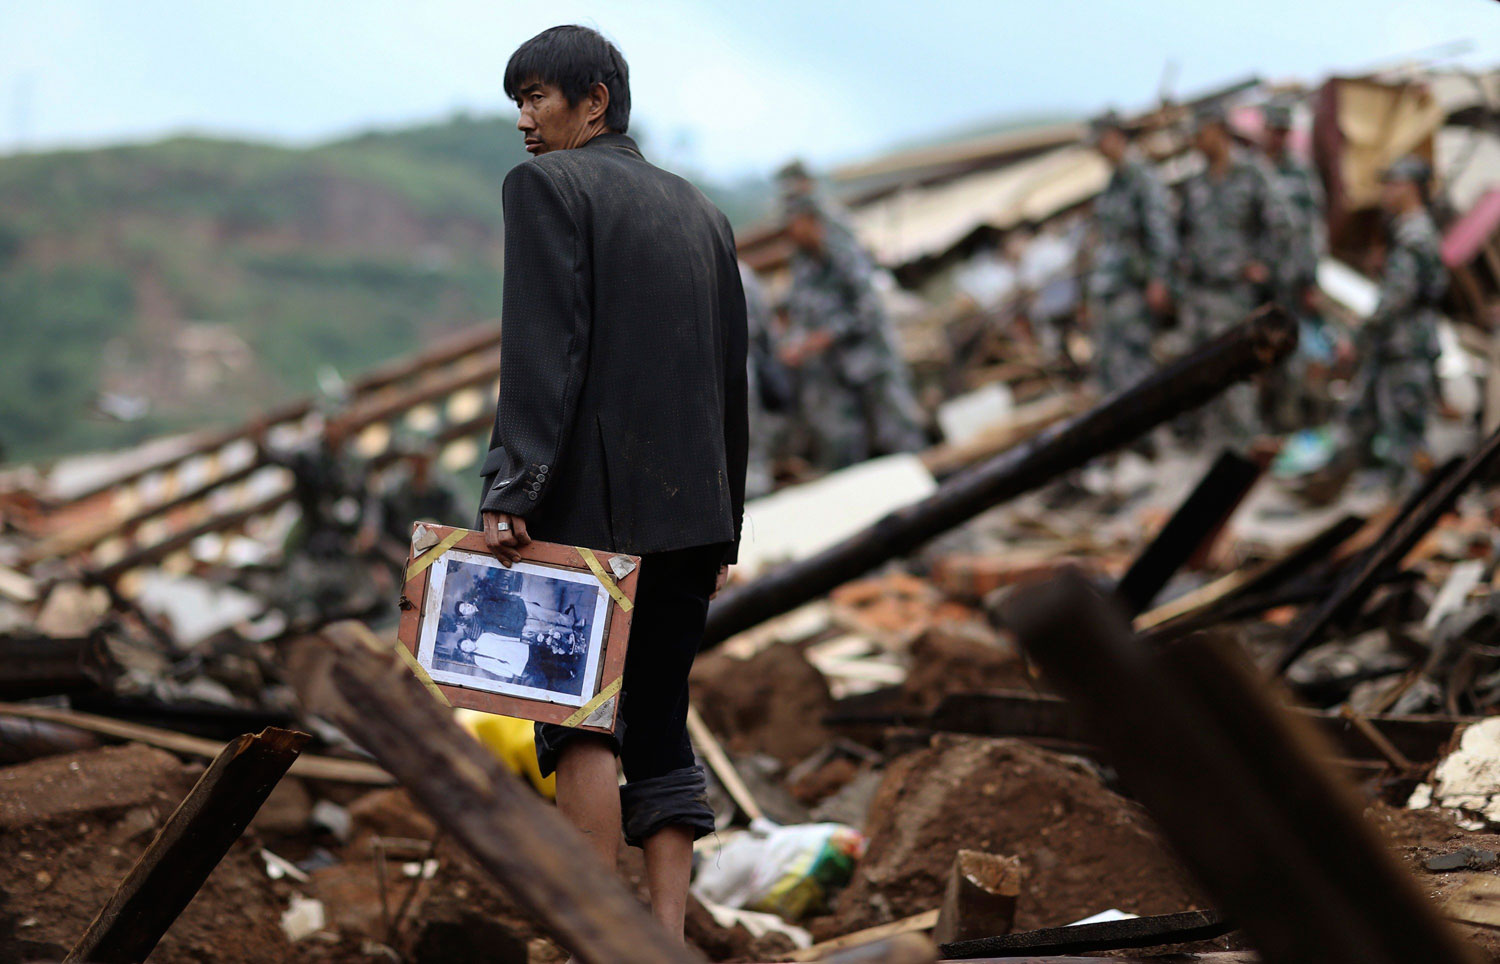 A man holds a picture as he stands among debris after an earthquake hit Longtoushan township of Ludian county